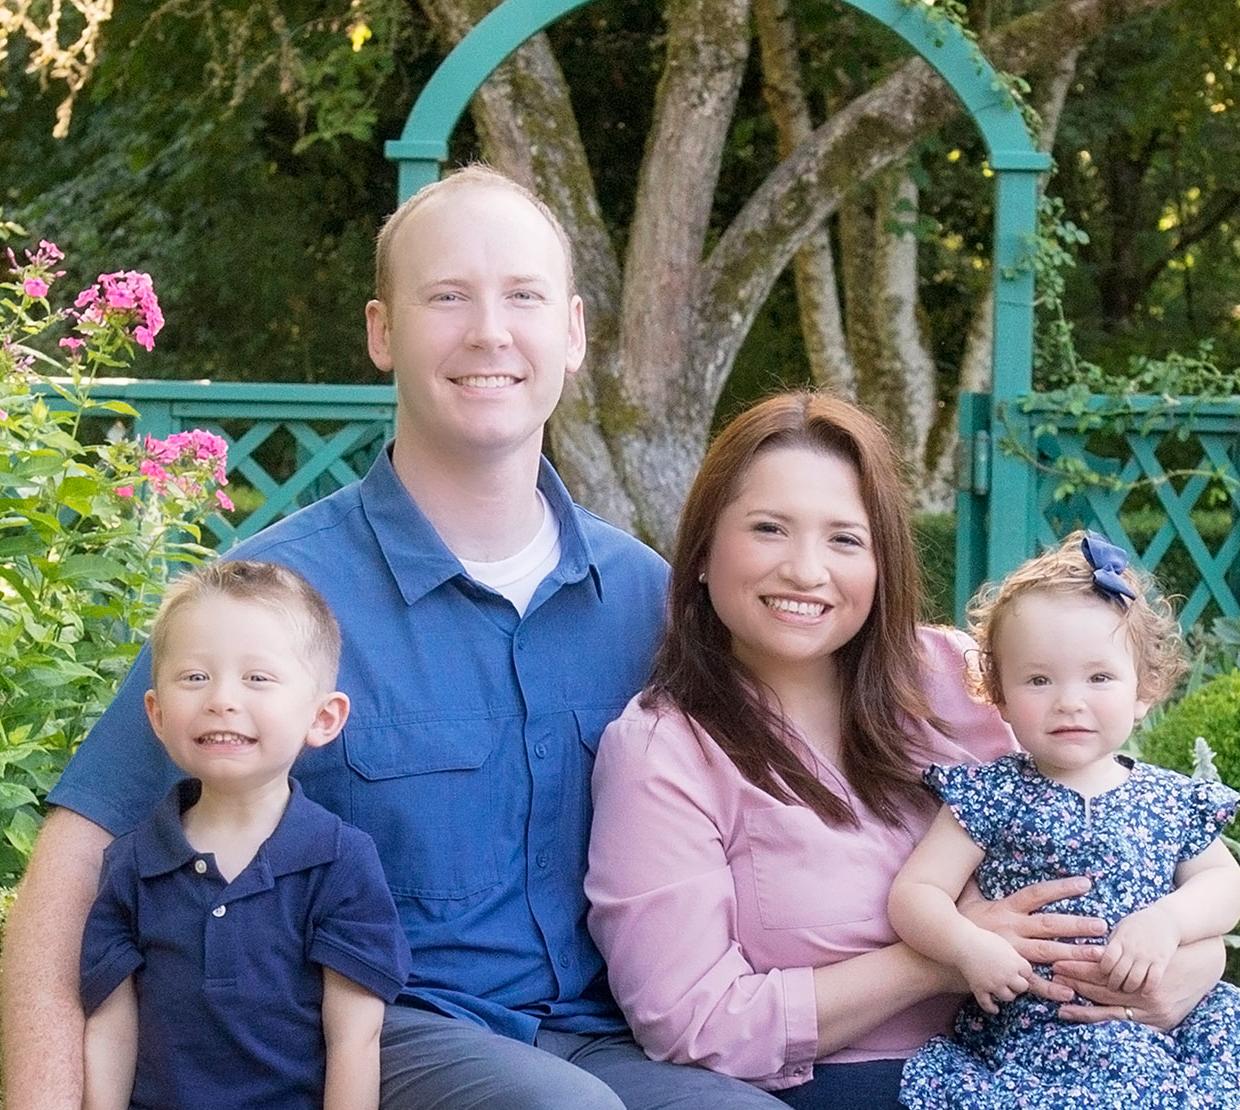 Drs. Luisa and Nathan Snyder with their children in garden